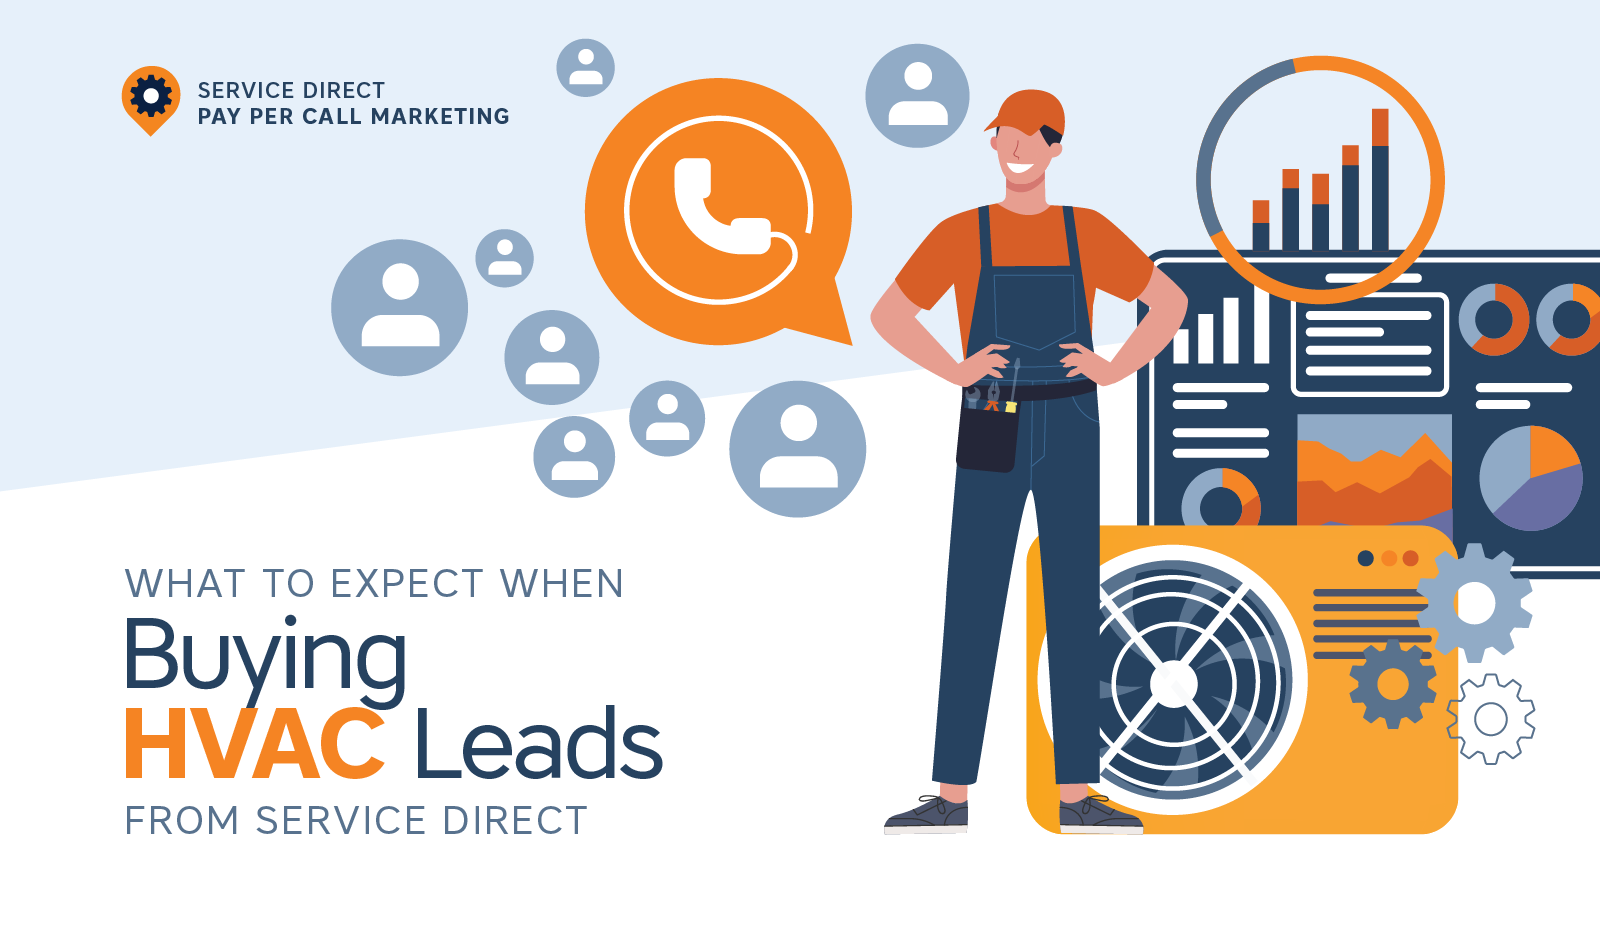 What to Expect When Buying HVAC Leads from Service Direct